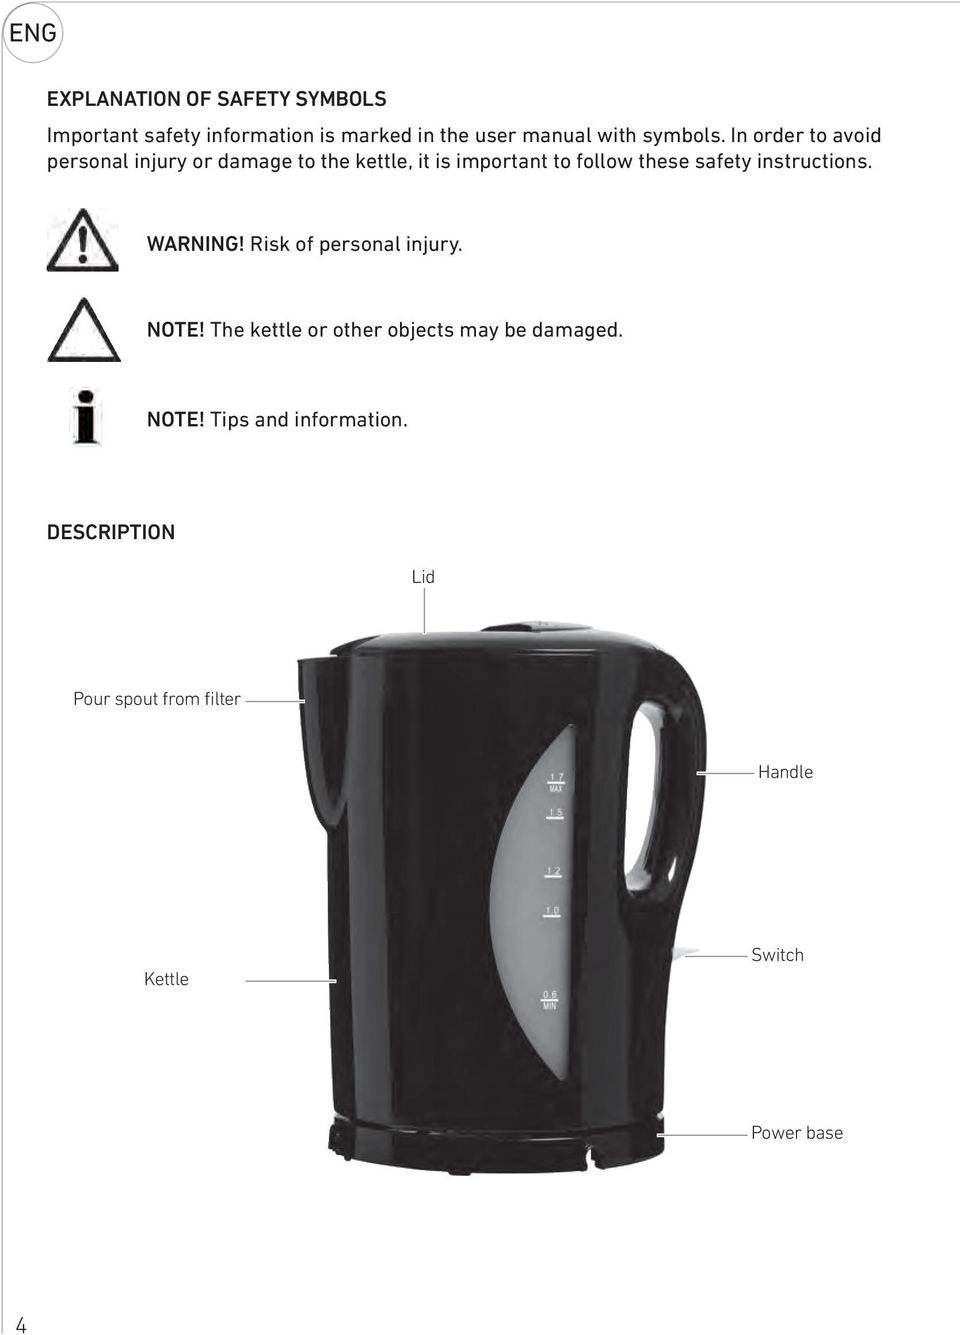 In order to avoid personal injury or damage to the kettle, it is important to follow these safety